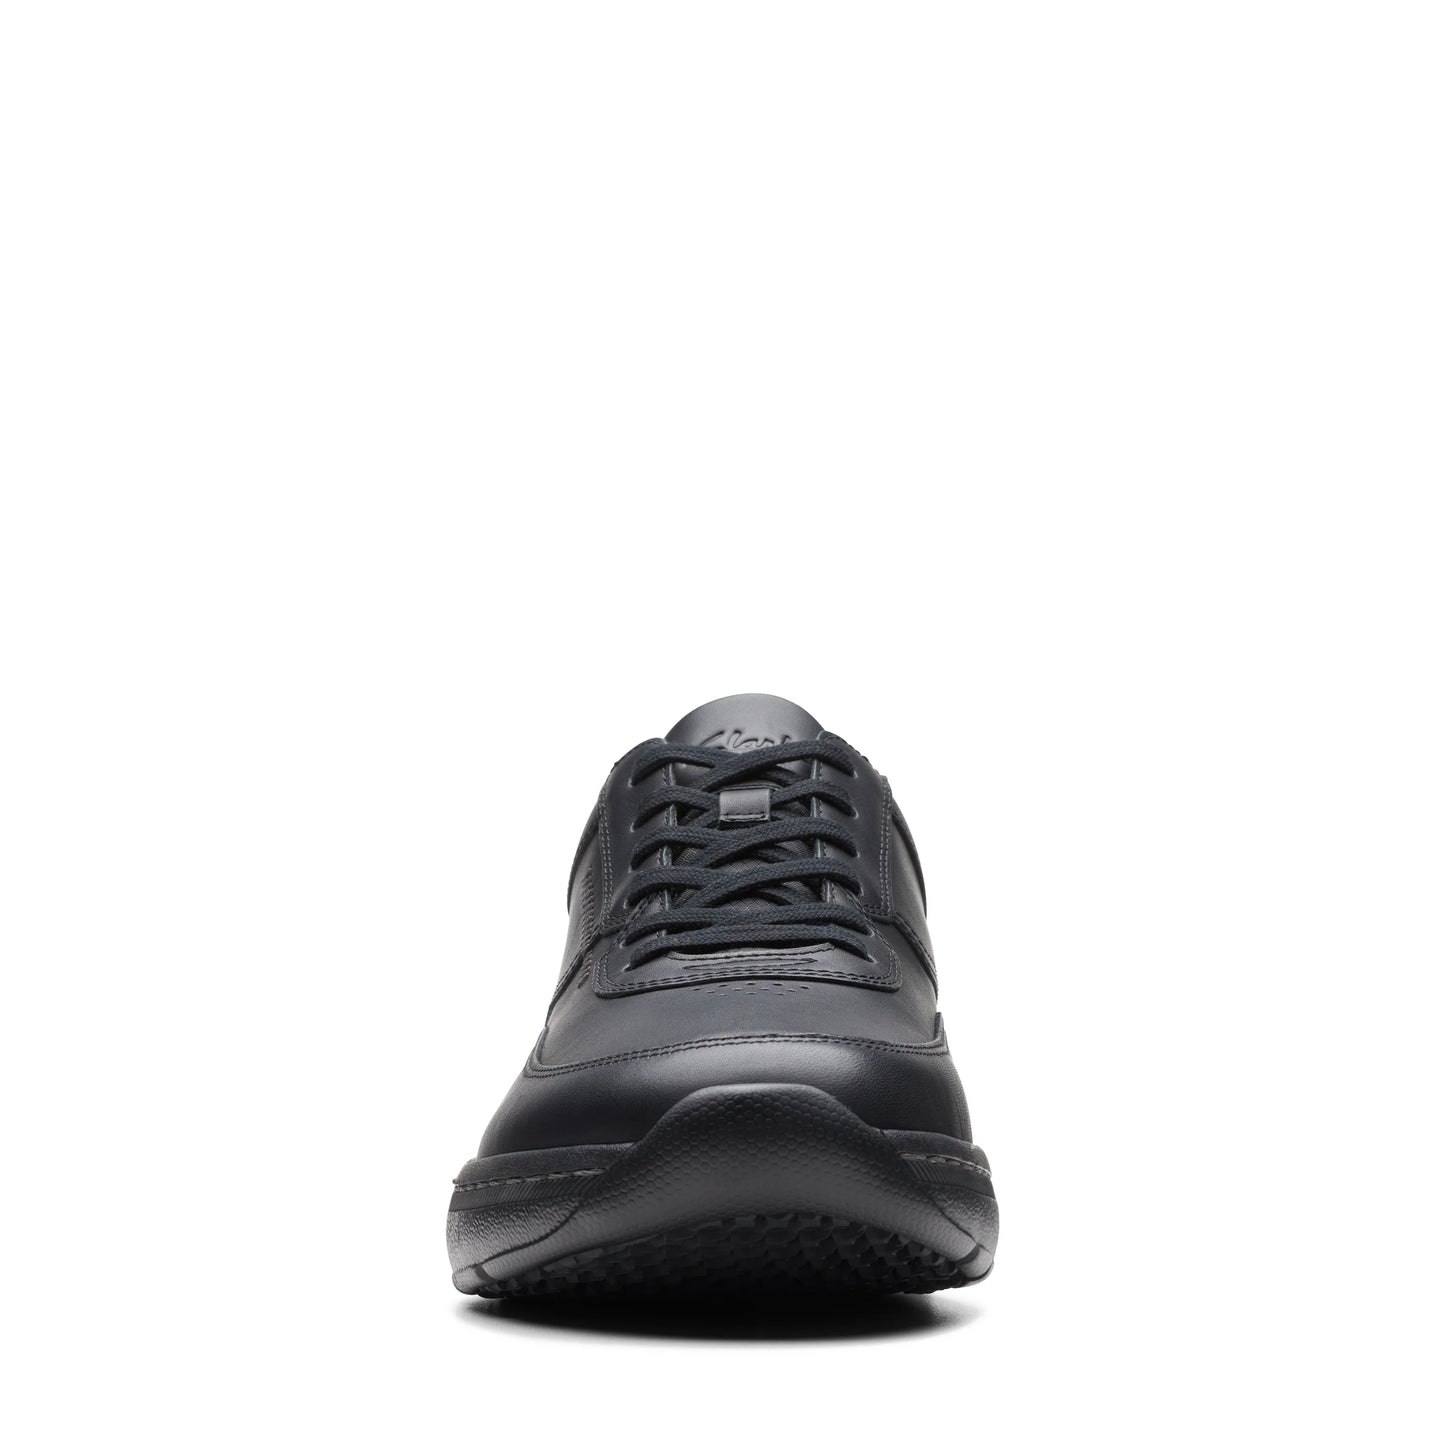 CLARKS | 男士德比鞋 | CLARKS PRO LACE BLACK LEATHER | 黑色的